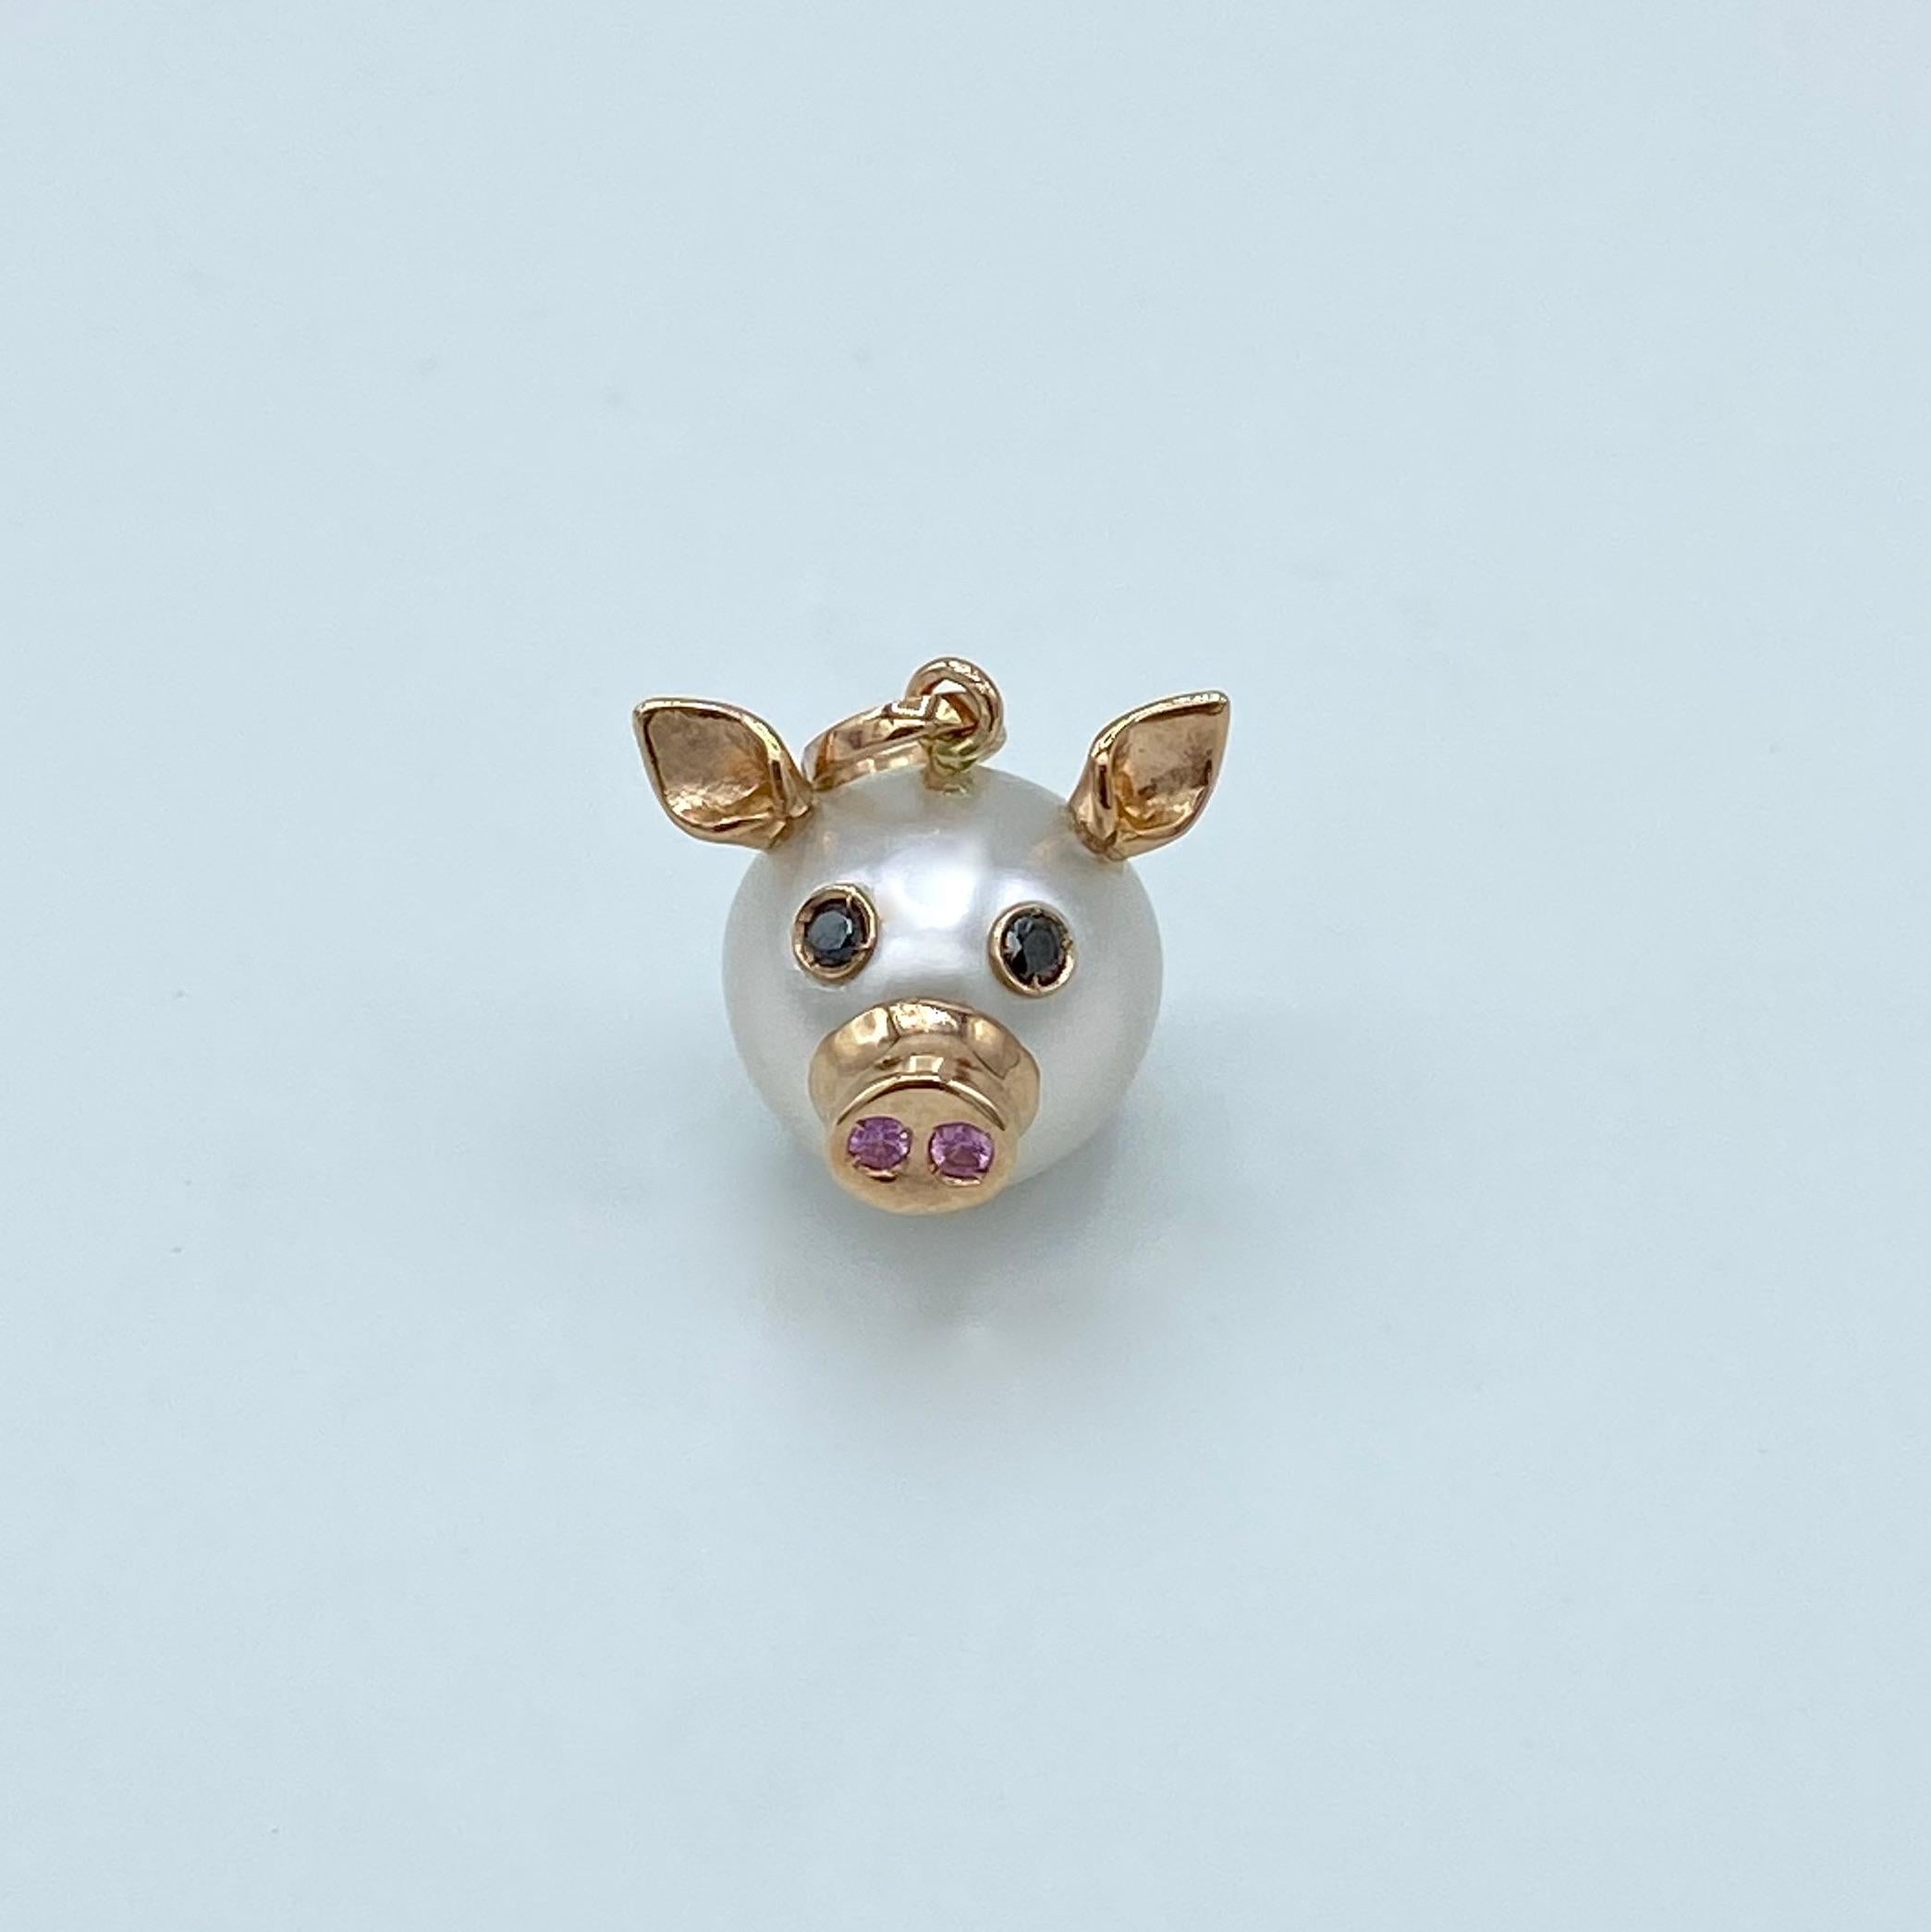 Pig Black Diamond Pink Sapphire 18kt Red Gold Pearl Pendant Necklace
This nice pendant is made with a button Australian pearl. 
It has two ears, two eyes with black diamonds.  
In the holes of its nose there are two pink sapphires encrusted, in